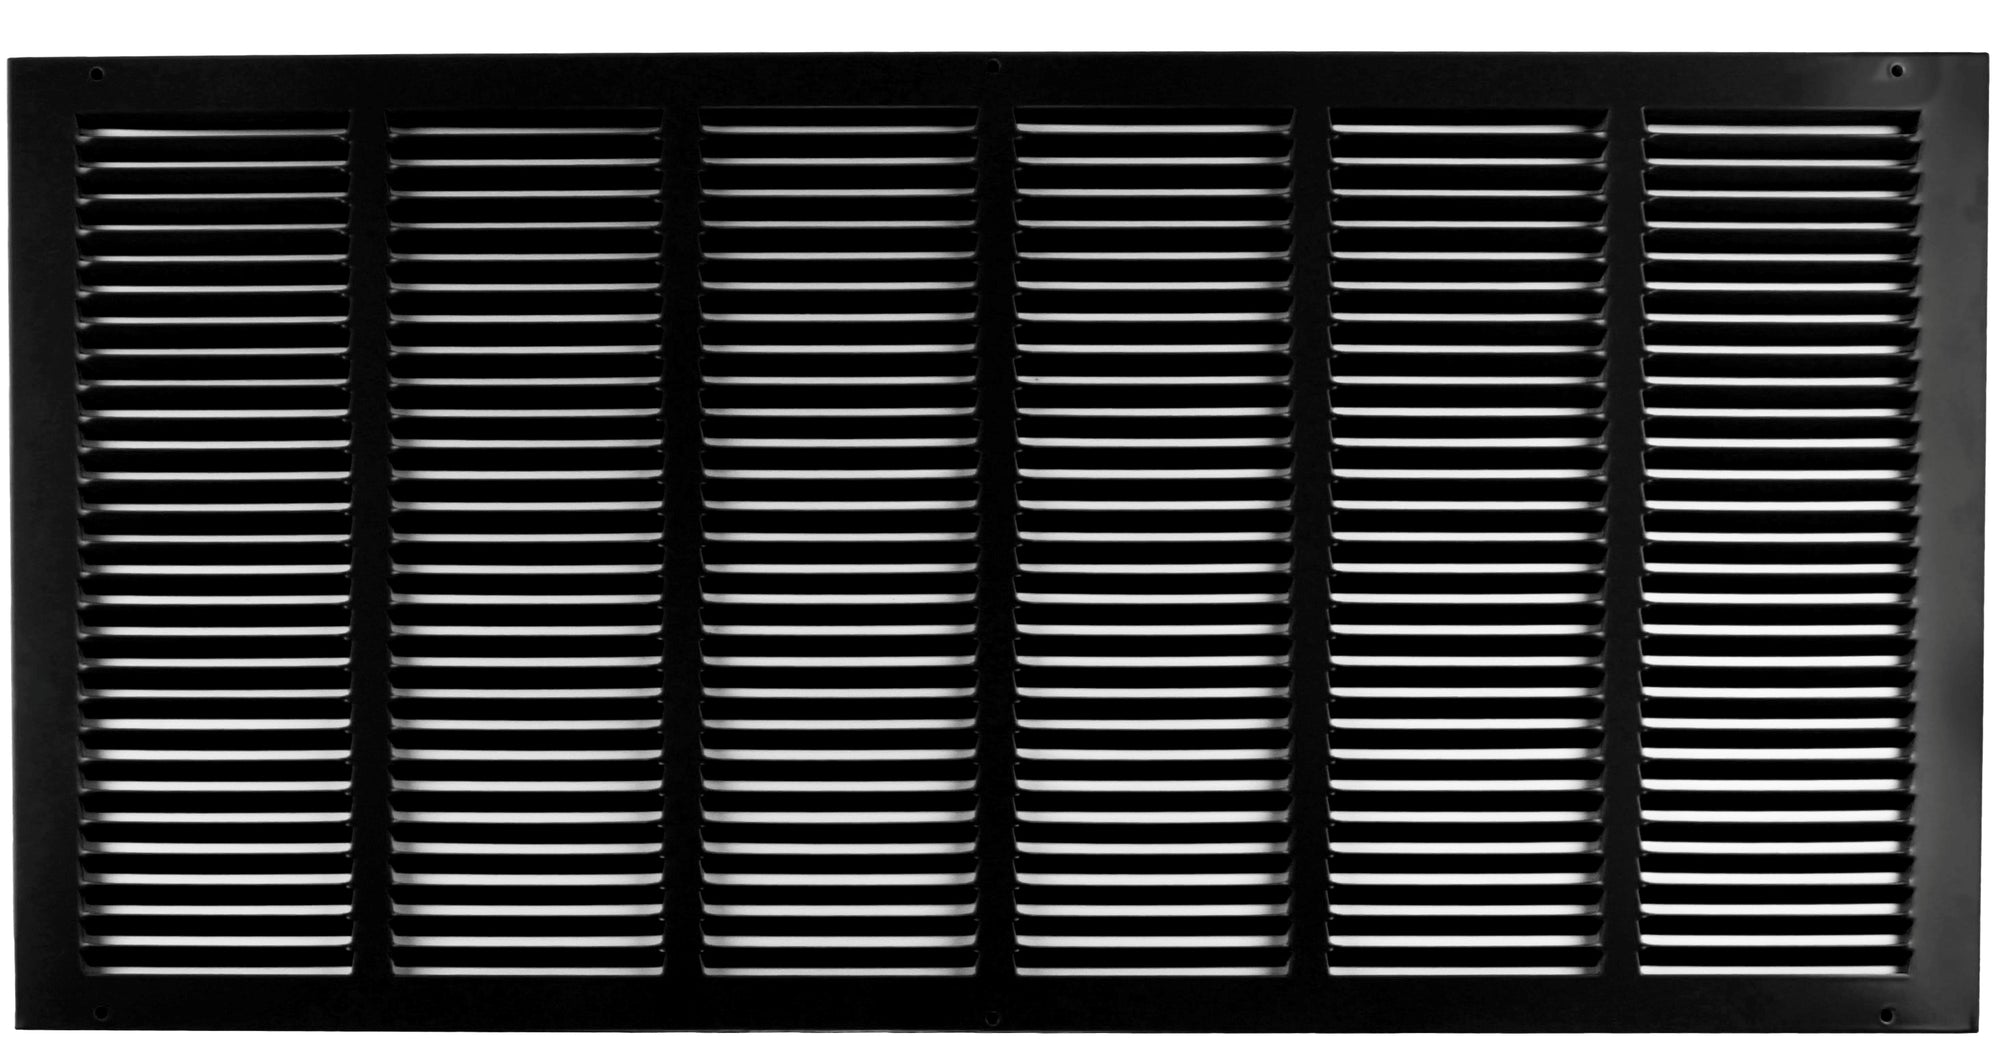 30" X 14" Air Vent Return Grilles - Sidewall and Ceiling - Steel